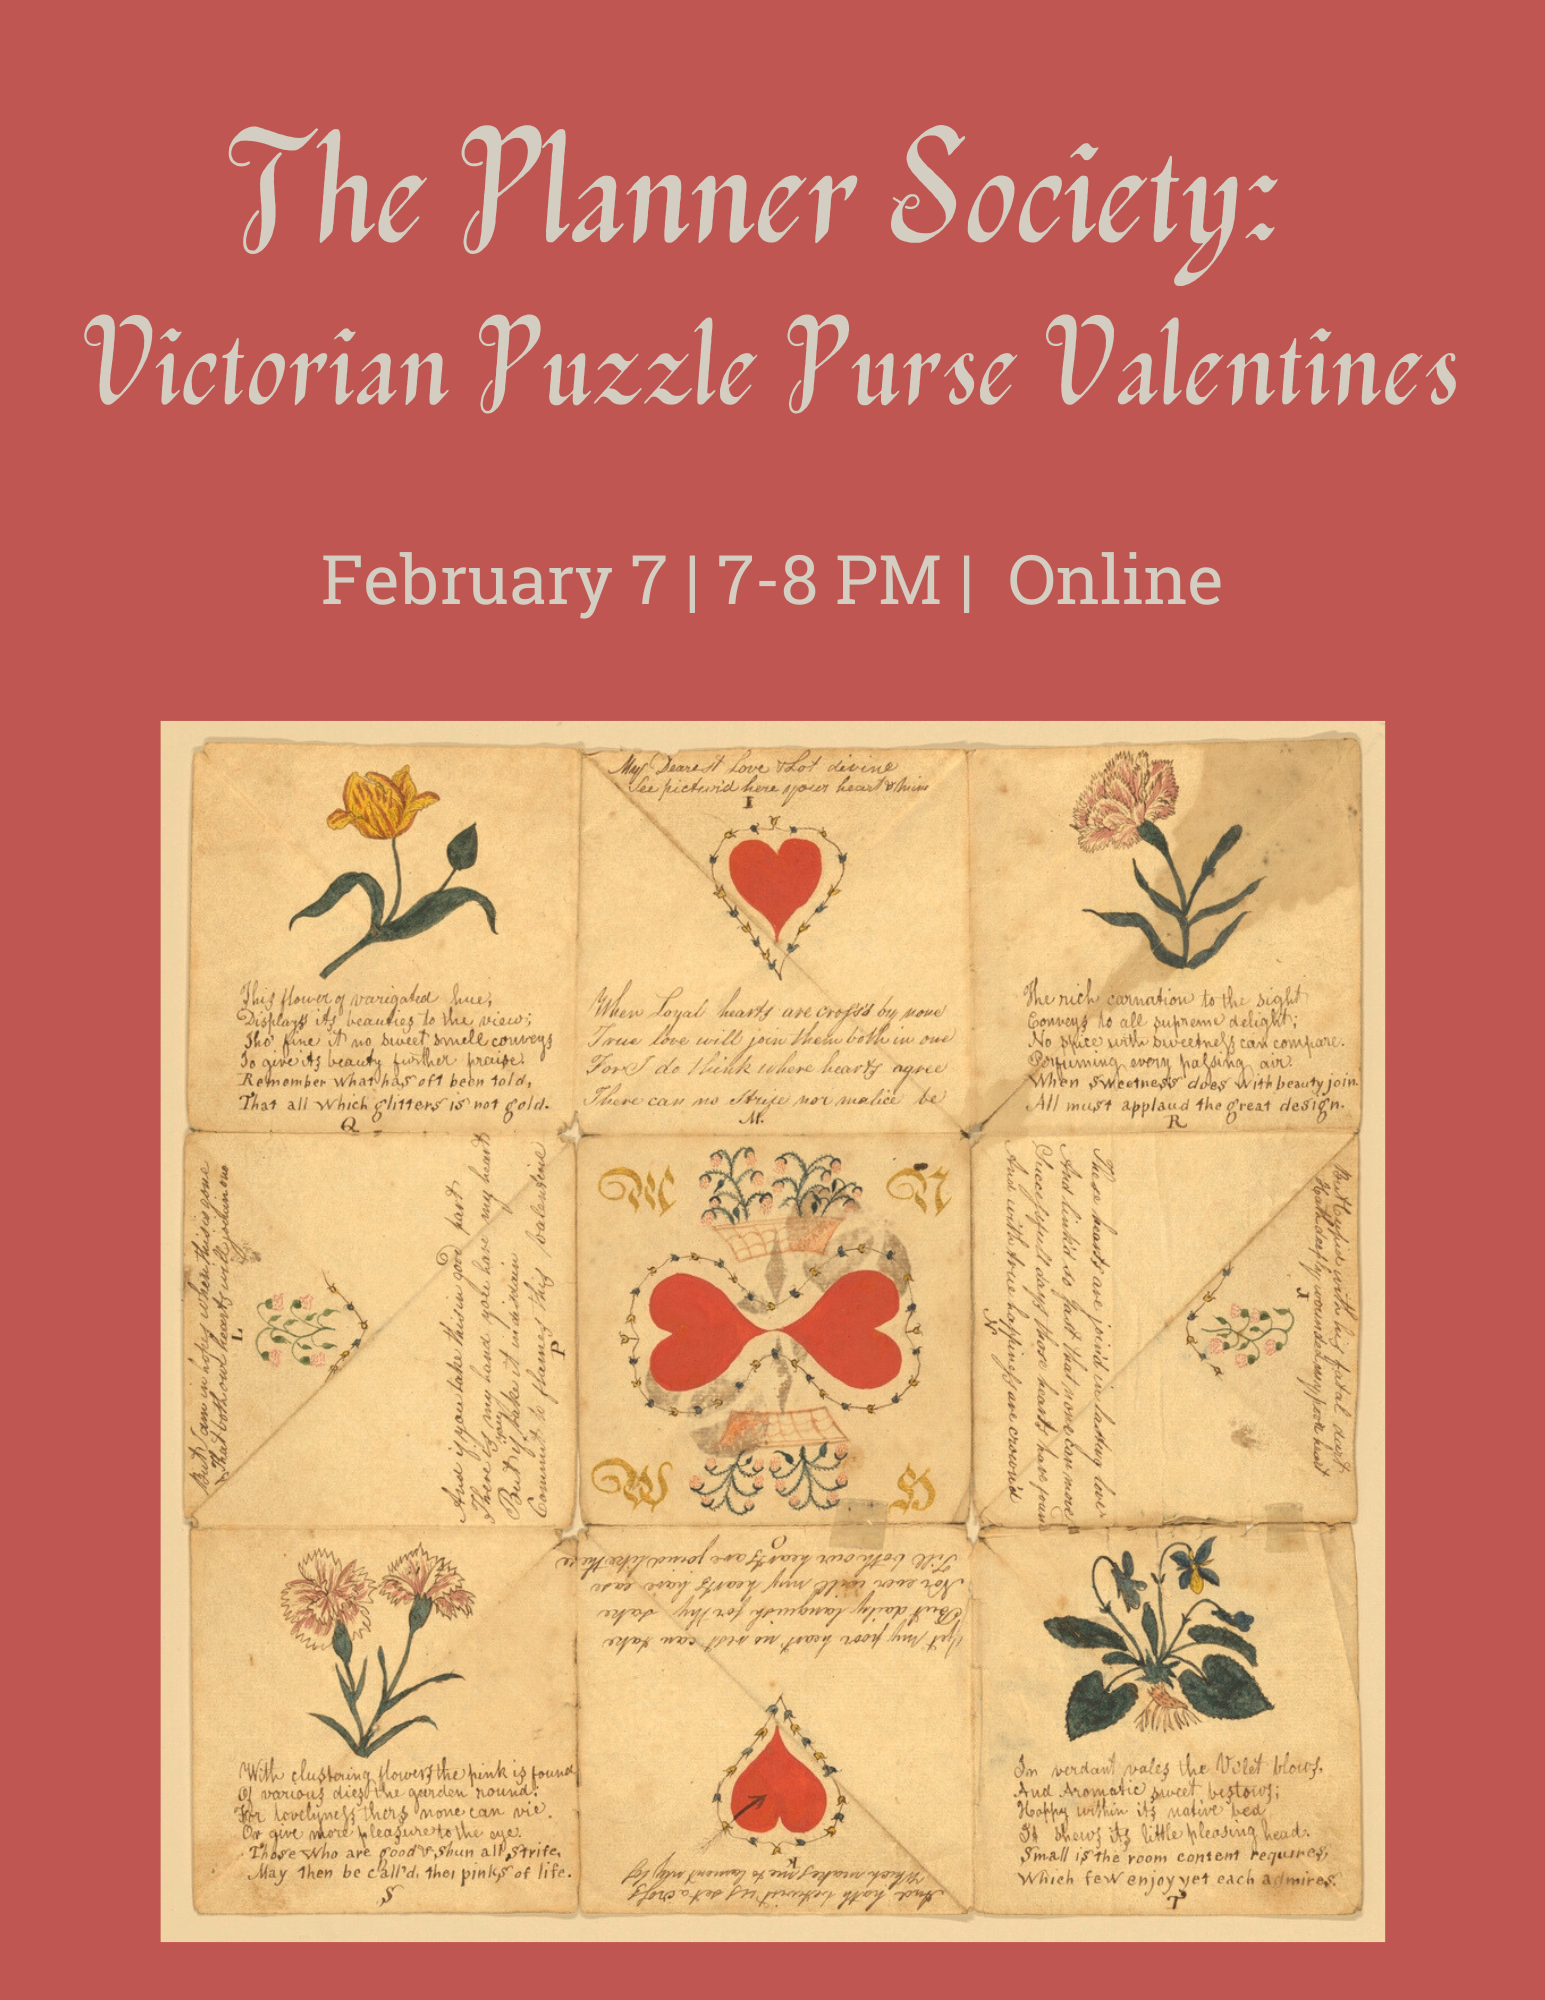 the planner society presents: victorian puzzle purse valentines. image of a folded valentine with hearts and flowers and messages of adoration.